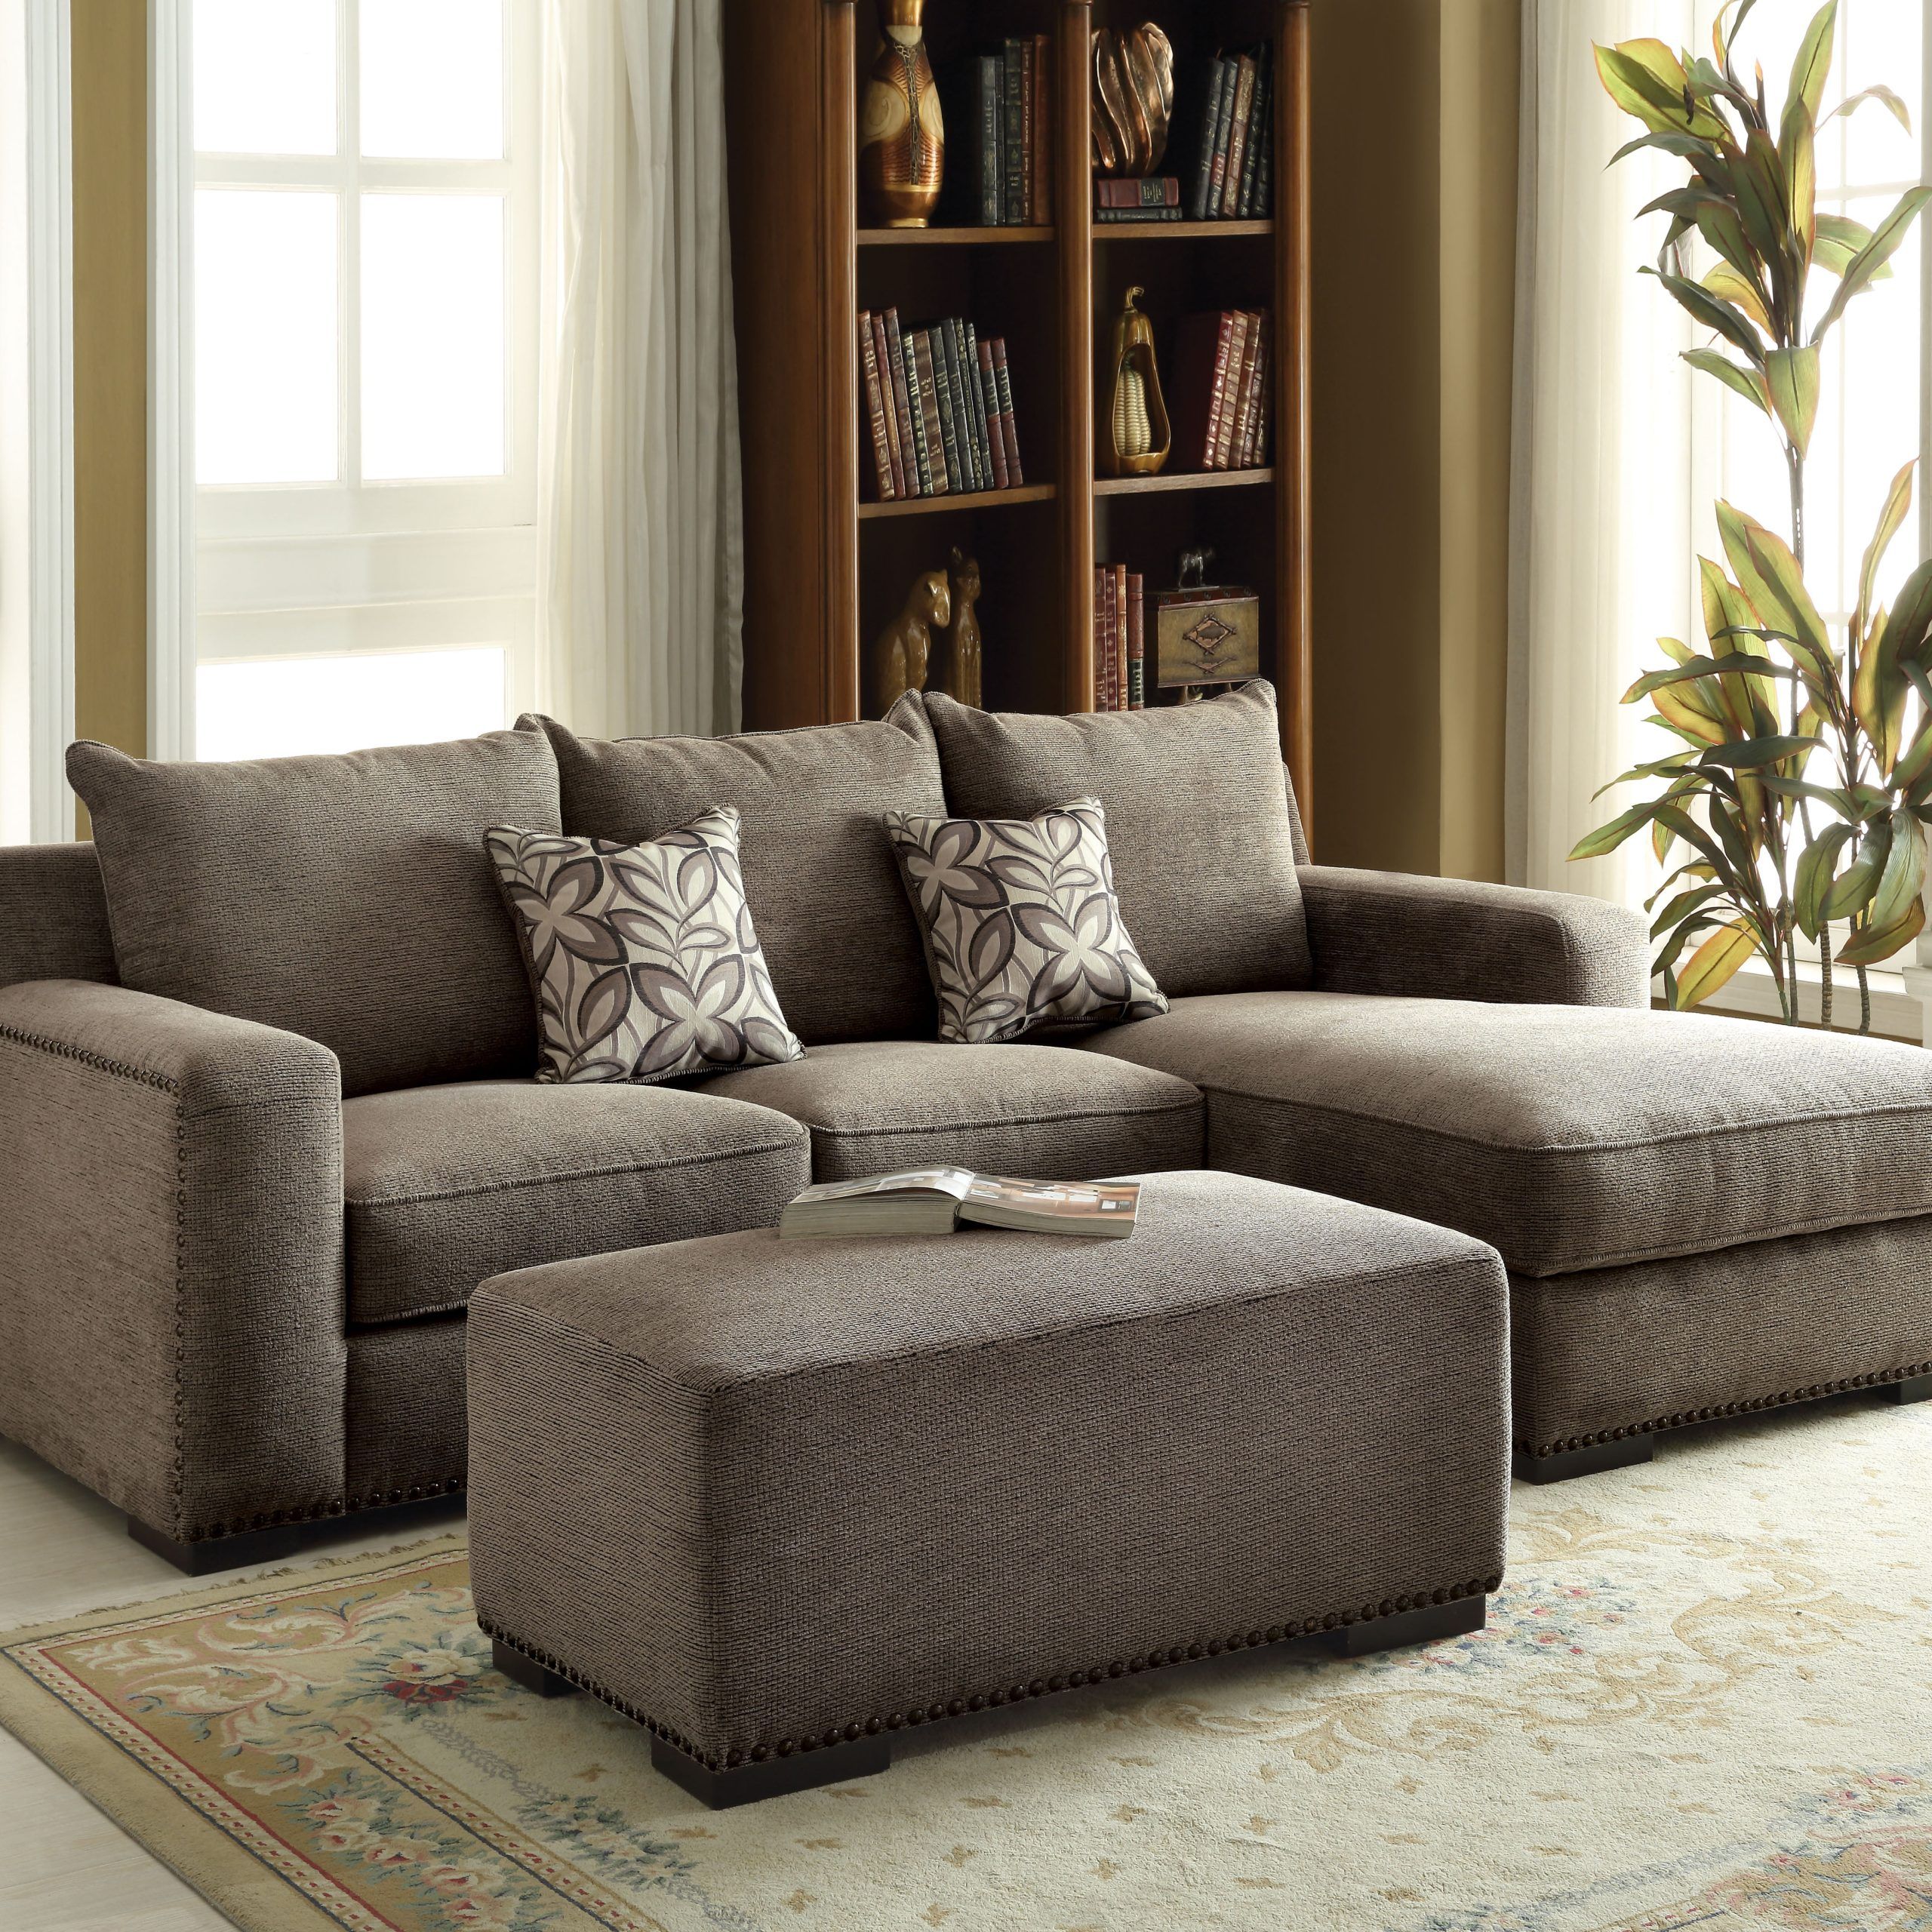 Acme Ushury Sectional Sofa With 2 Pillows , Gray Chenille – Walmart With Famous Chenille Sectional Sofas (View 10 of 15)